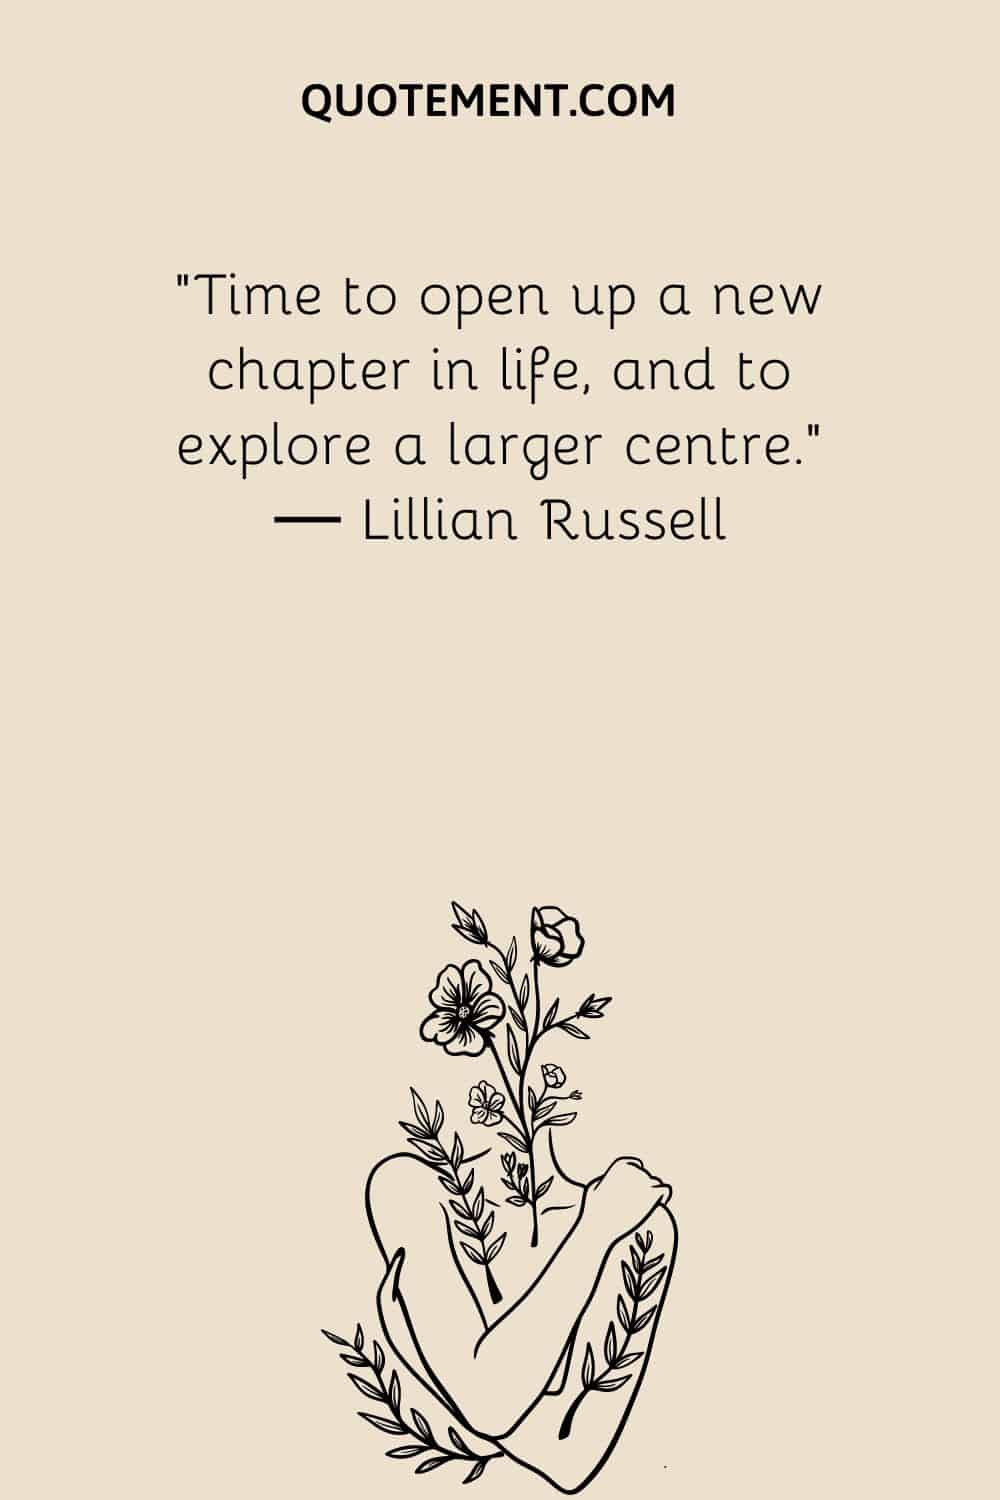 Time to open up a new chapter in life, and to explore a larger centre